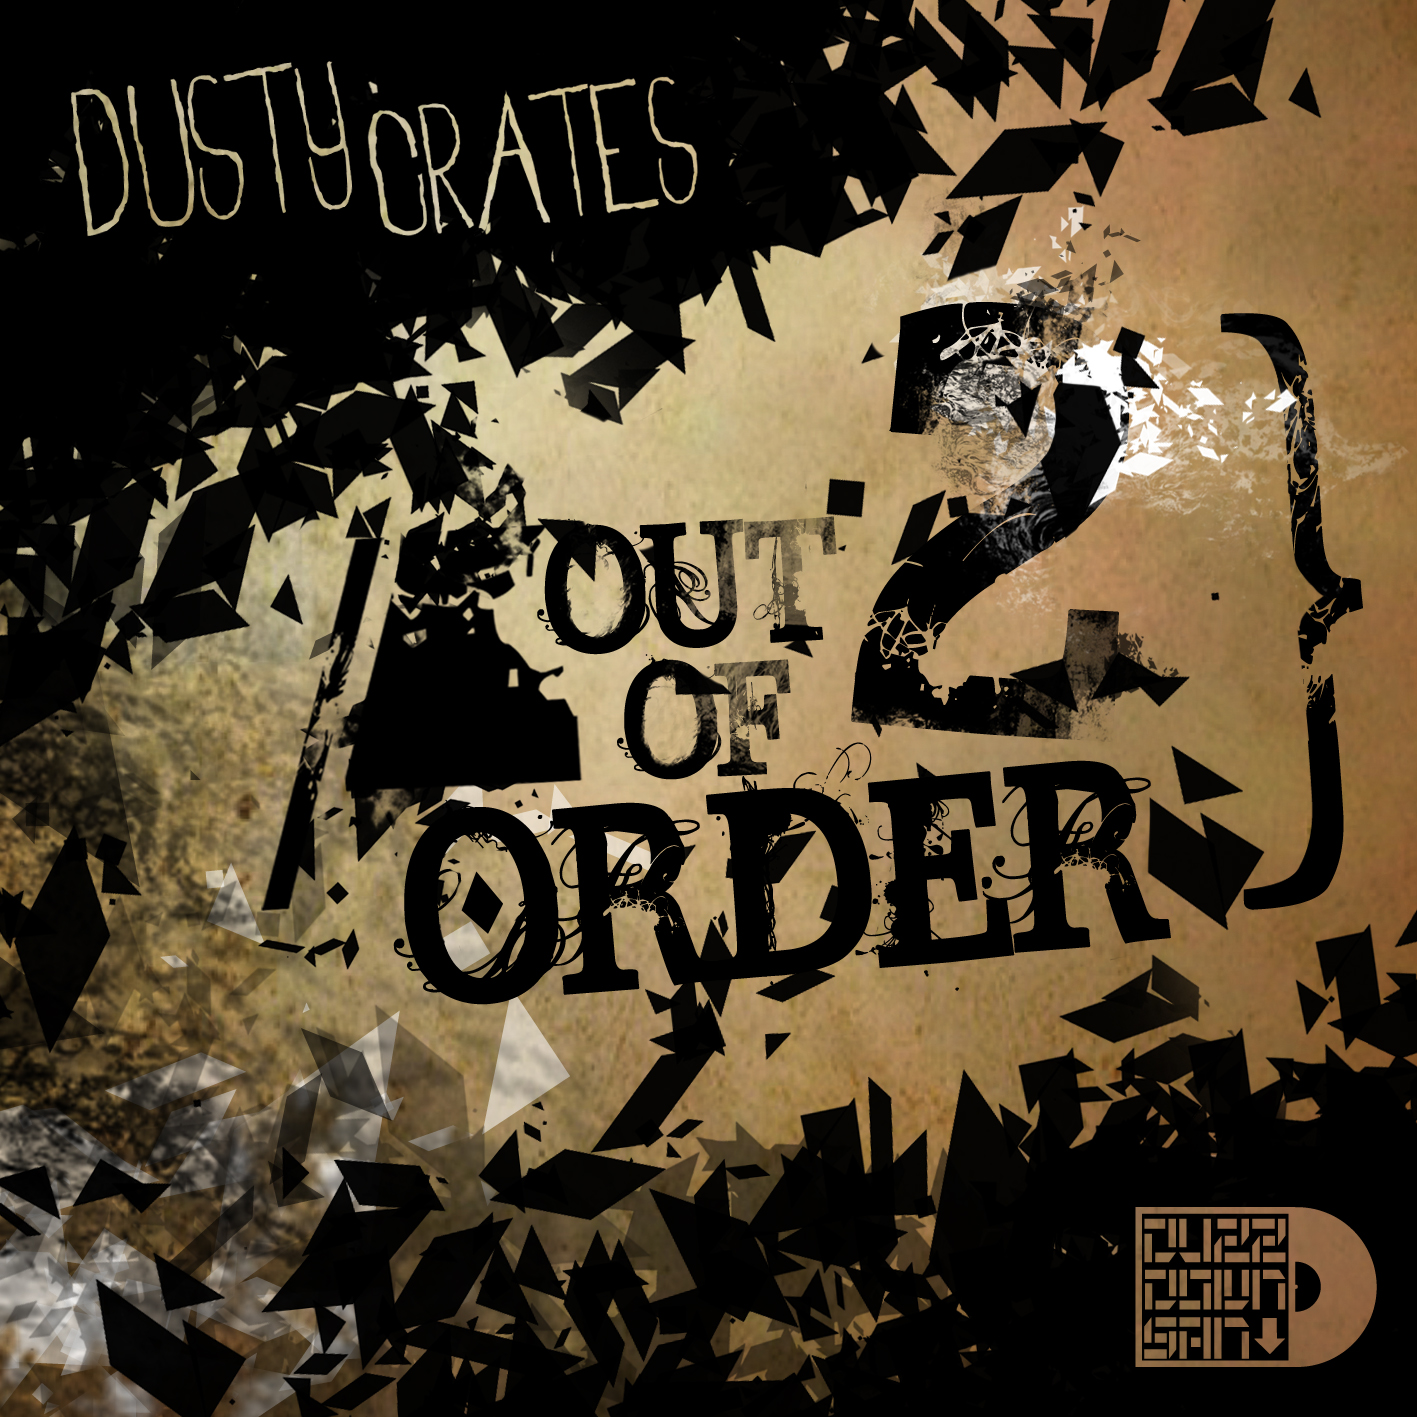 Free Download: Dusty Crates – Out Of Order 2 (2011)